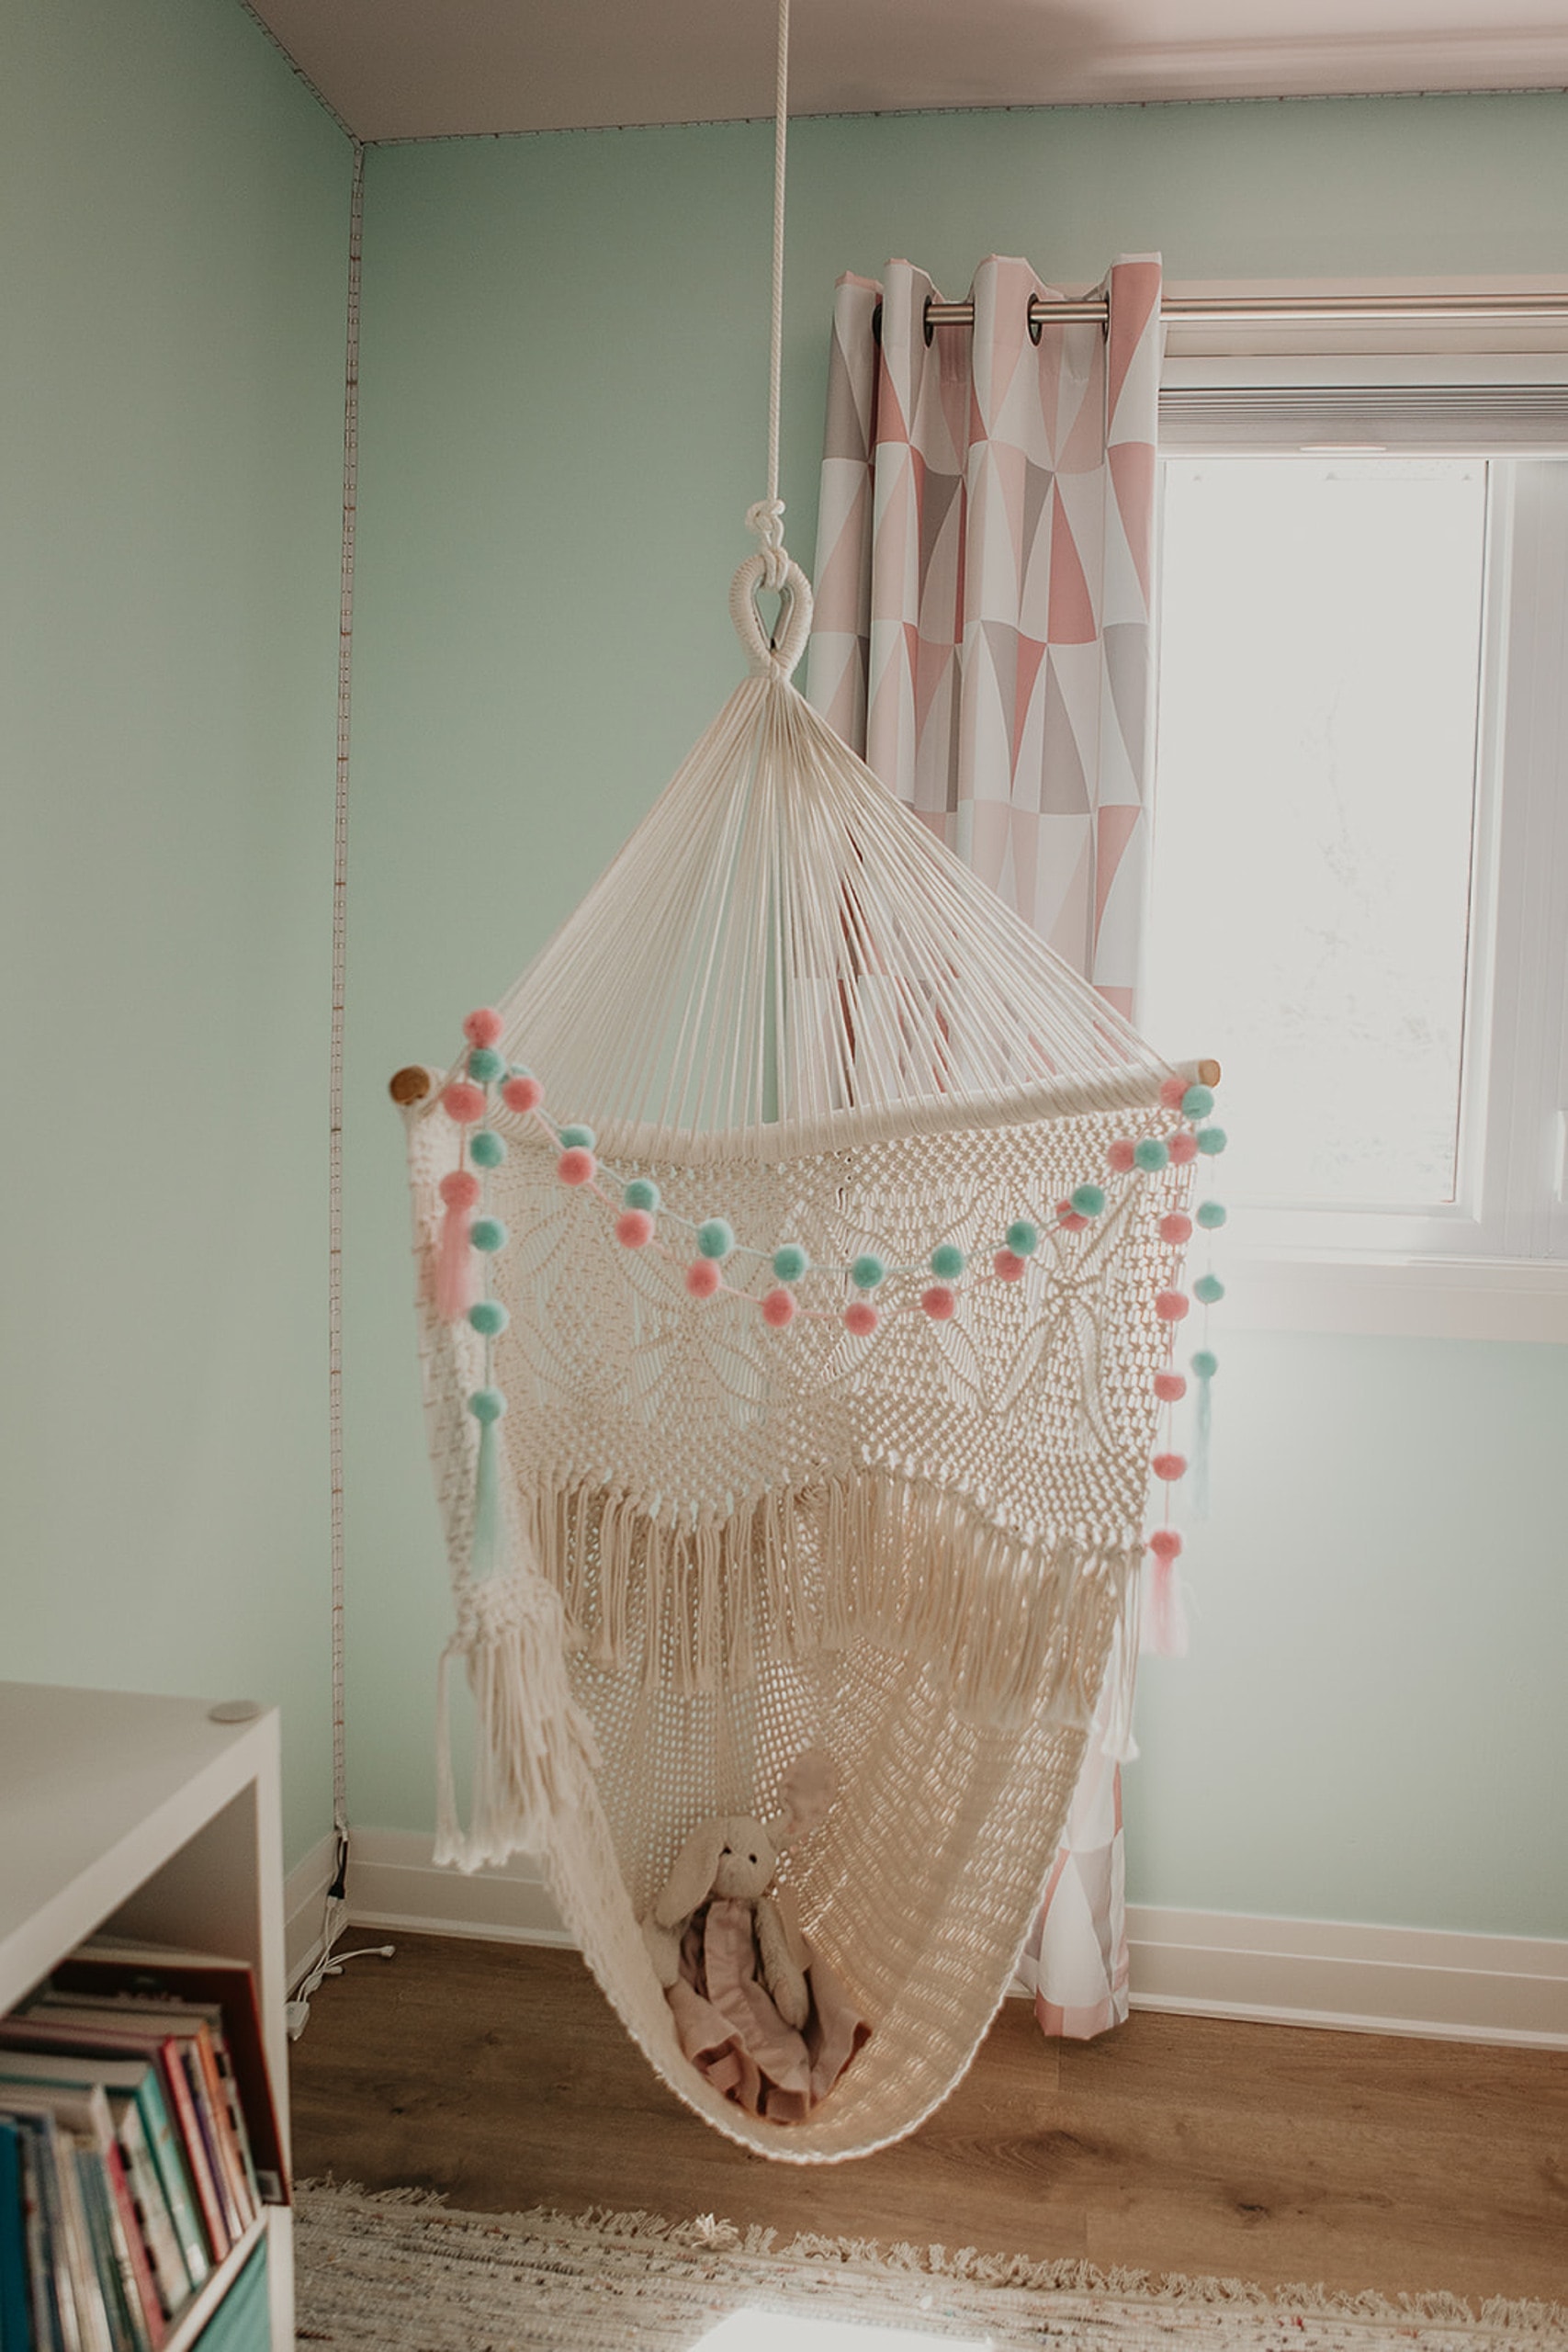 Hanging chair in a kids' room